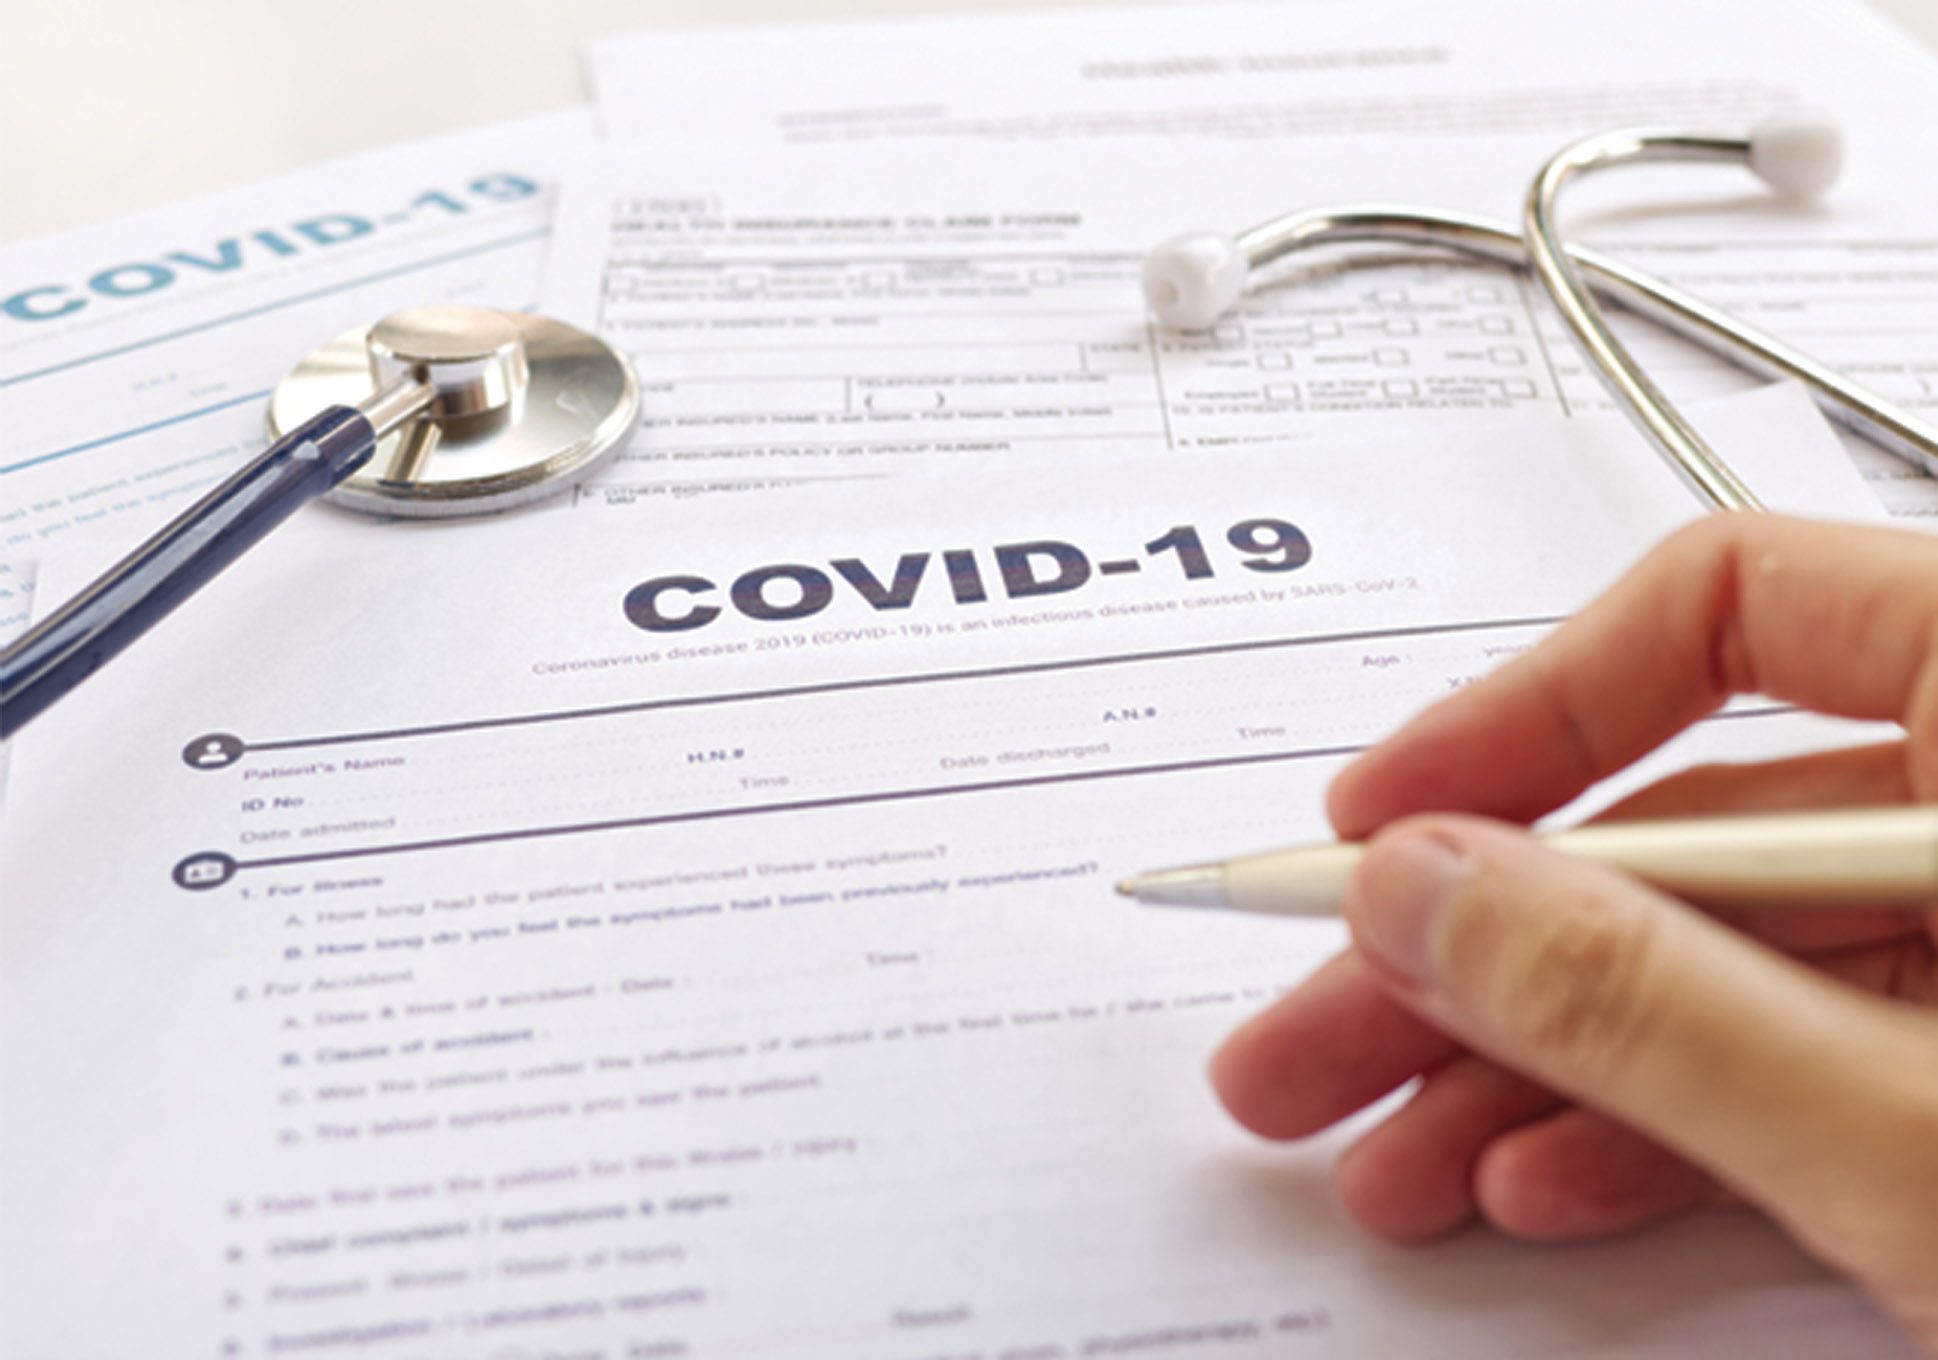 Coronavirus, Also Known as COVID-19: How Are Insurance Companies Handling It